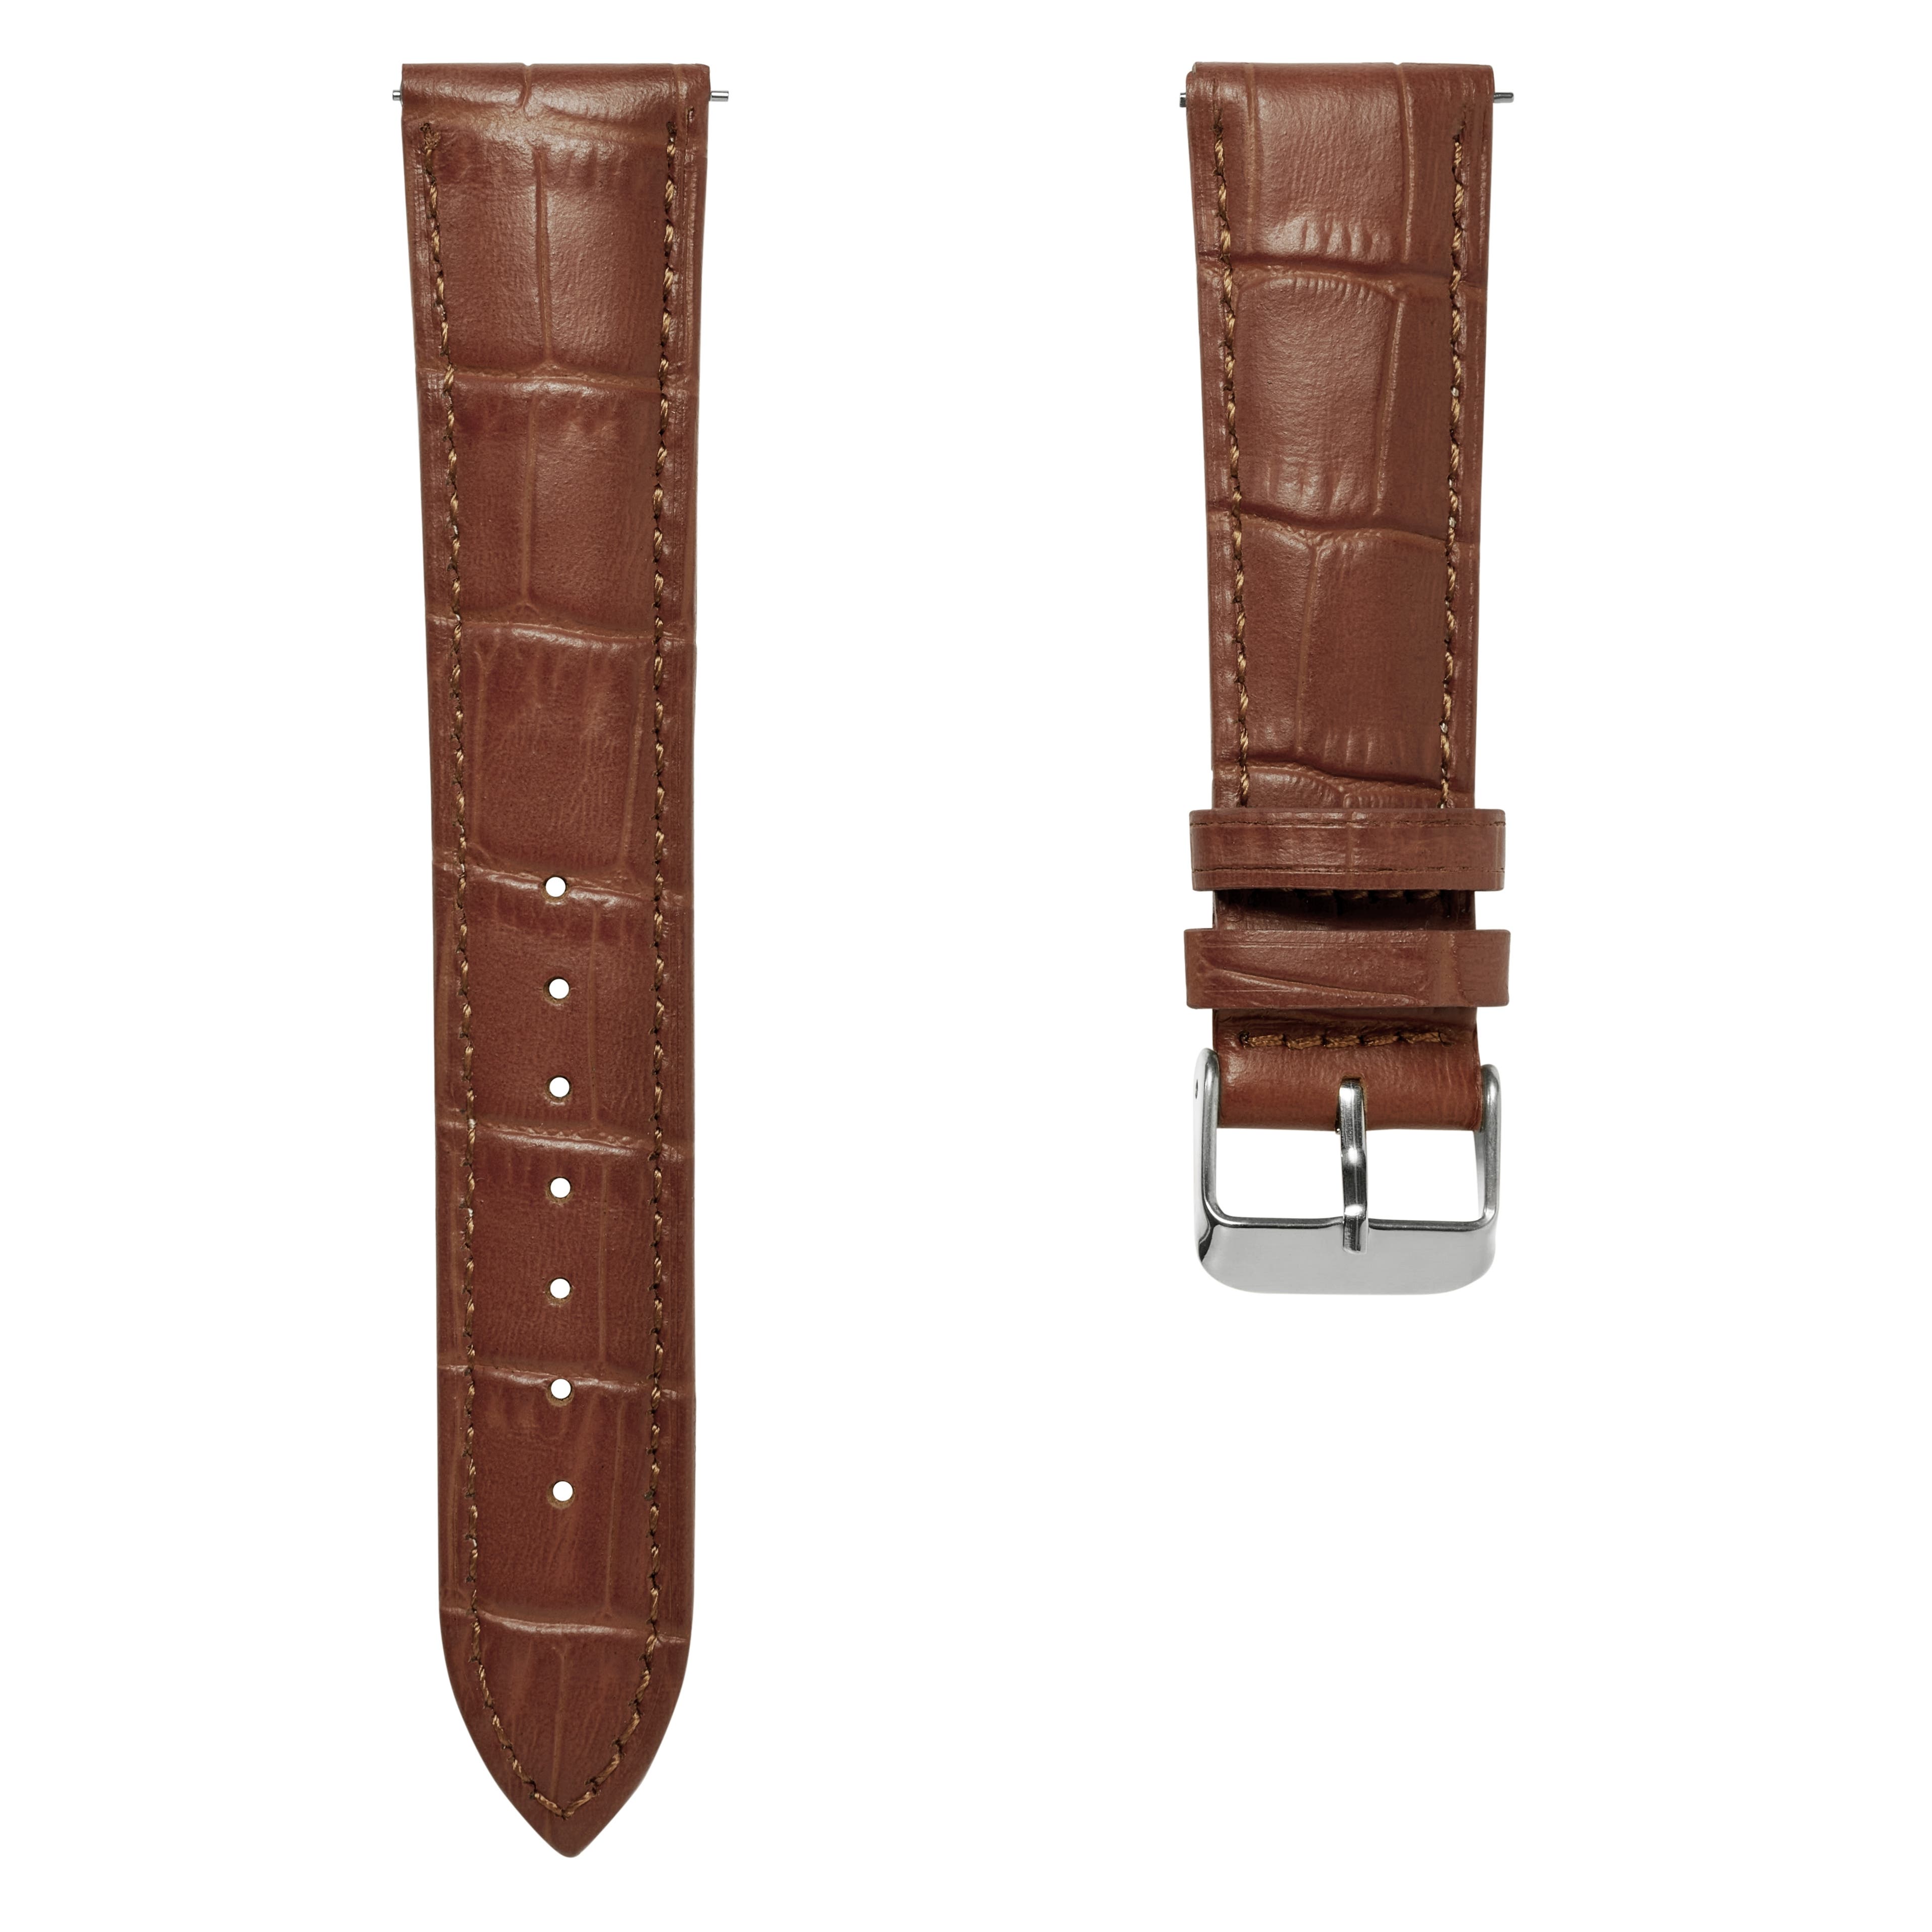 20 mm Crocodile-Embossed Tan Leather Watch Strap with Silver-Tone Buckle – Quick Release